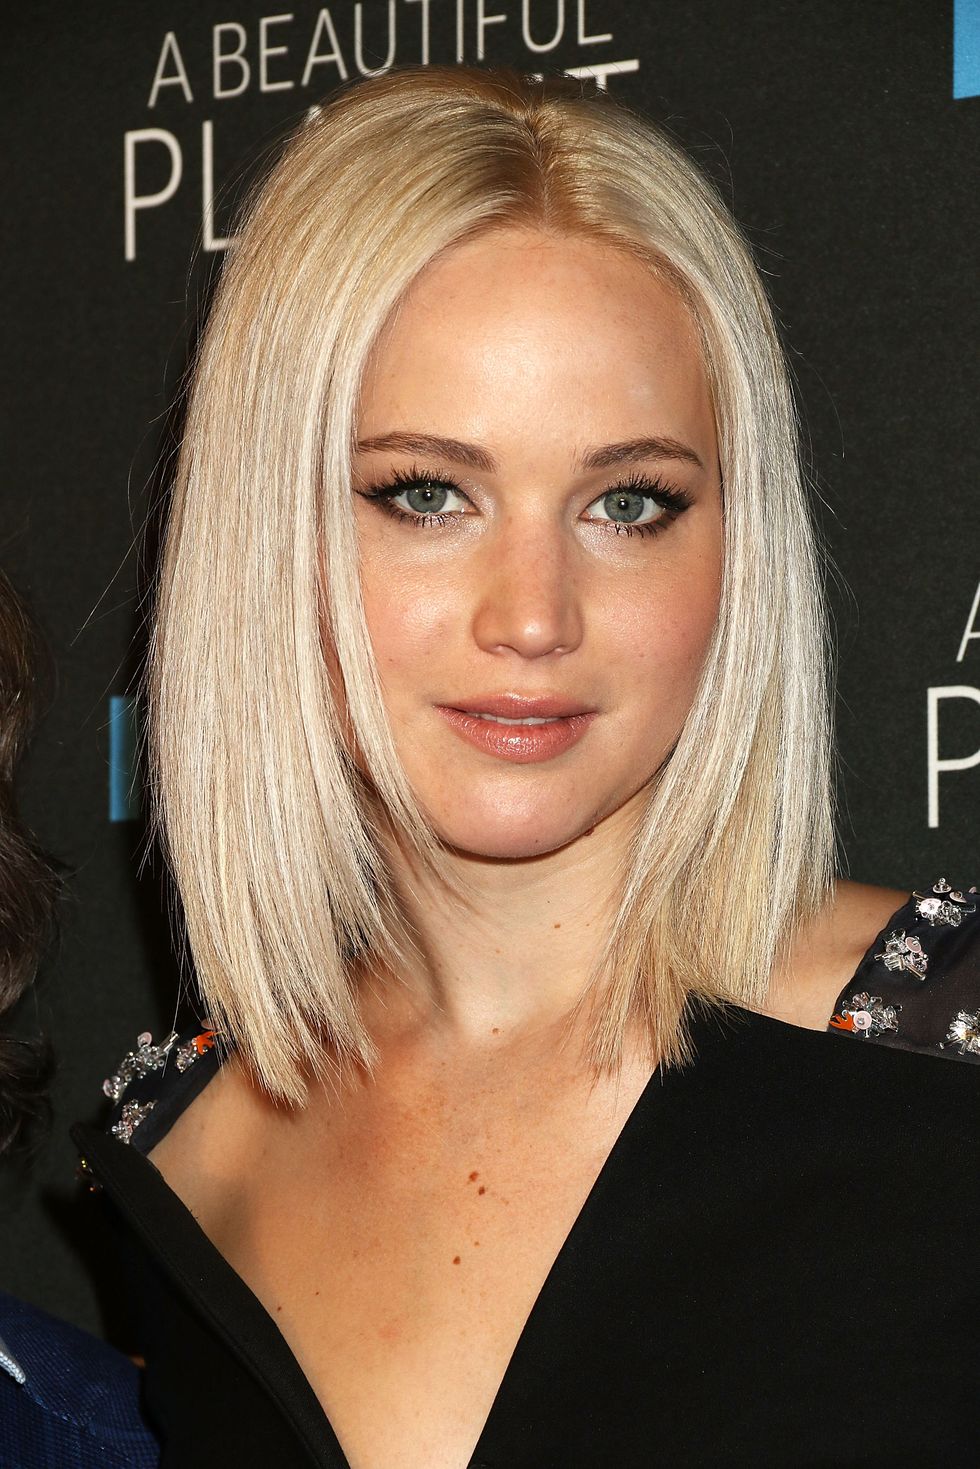 Jennifer Lawrence at the premiere of A Beautiful Planet